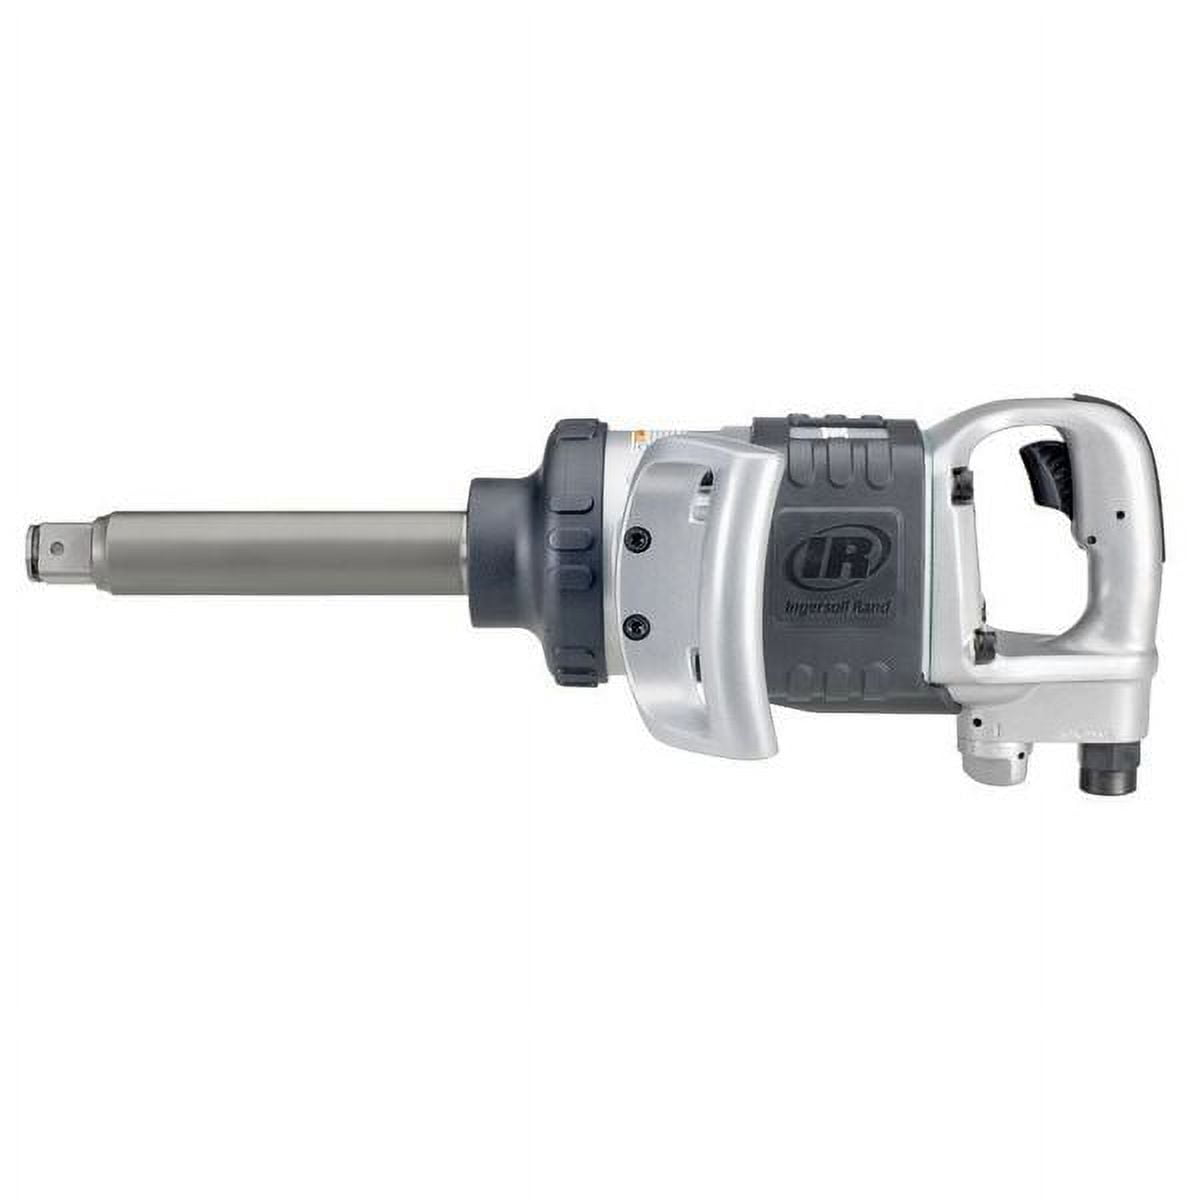 Ingersoll Rand 285B-6 Heavy Duty Pneumatic Impact Wrench with 6